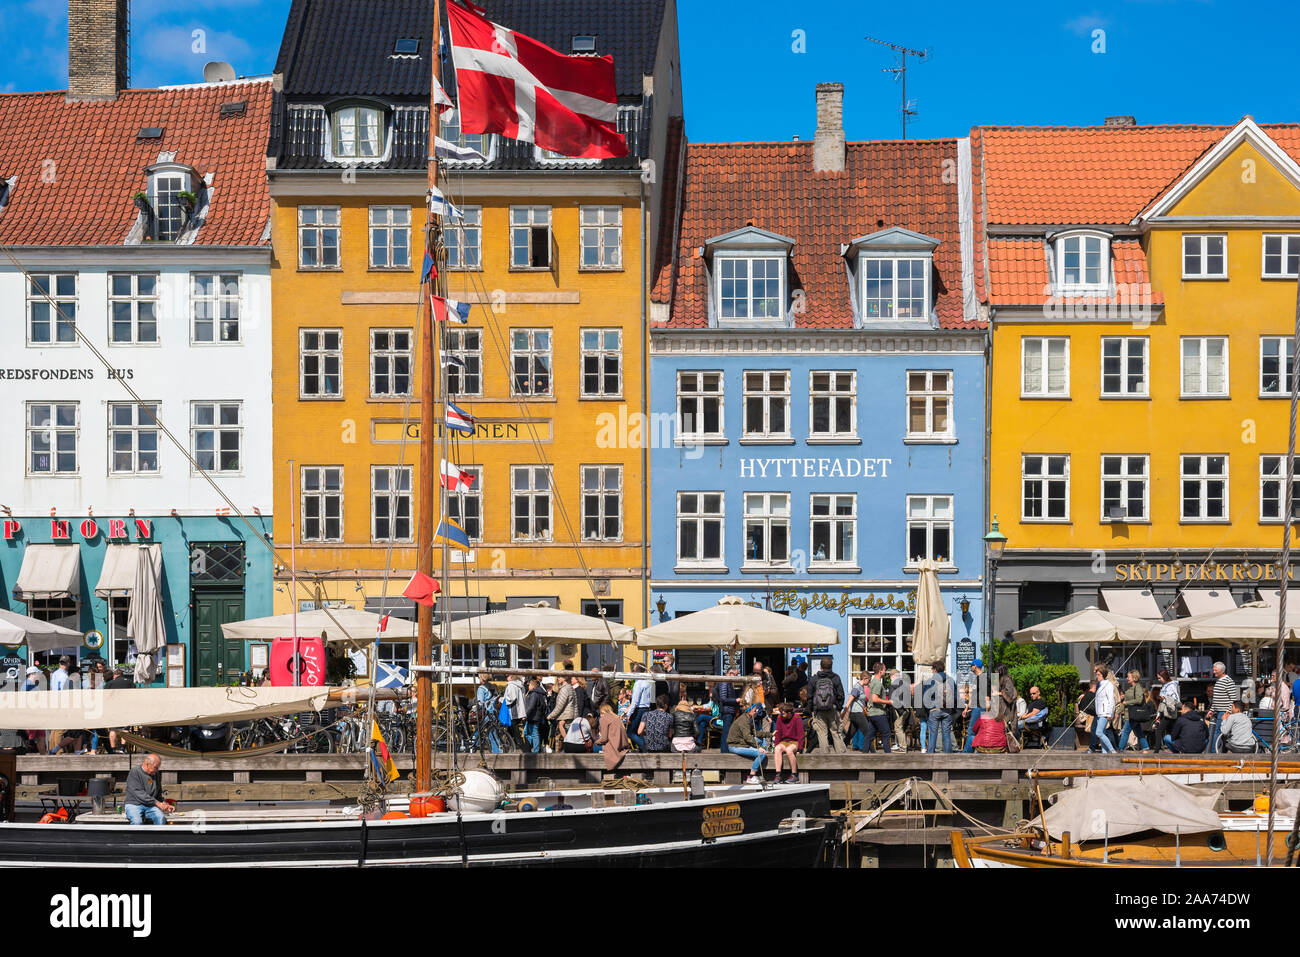 Copenhagen harbor, view in late spring of colorful waterfront buildings along the busy Nyhavn quay in the harbor area of Copenhagen, Denmark. Stock Photo